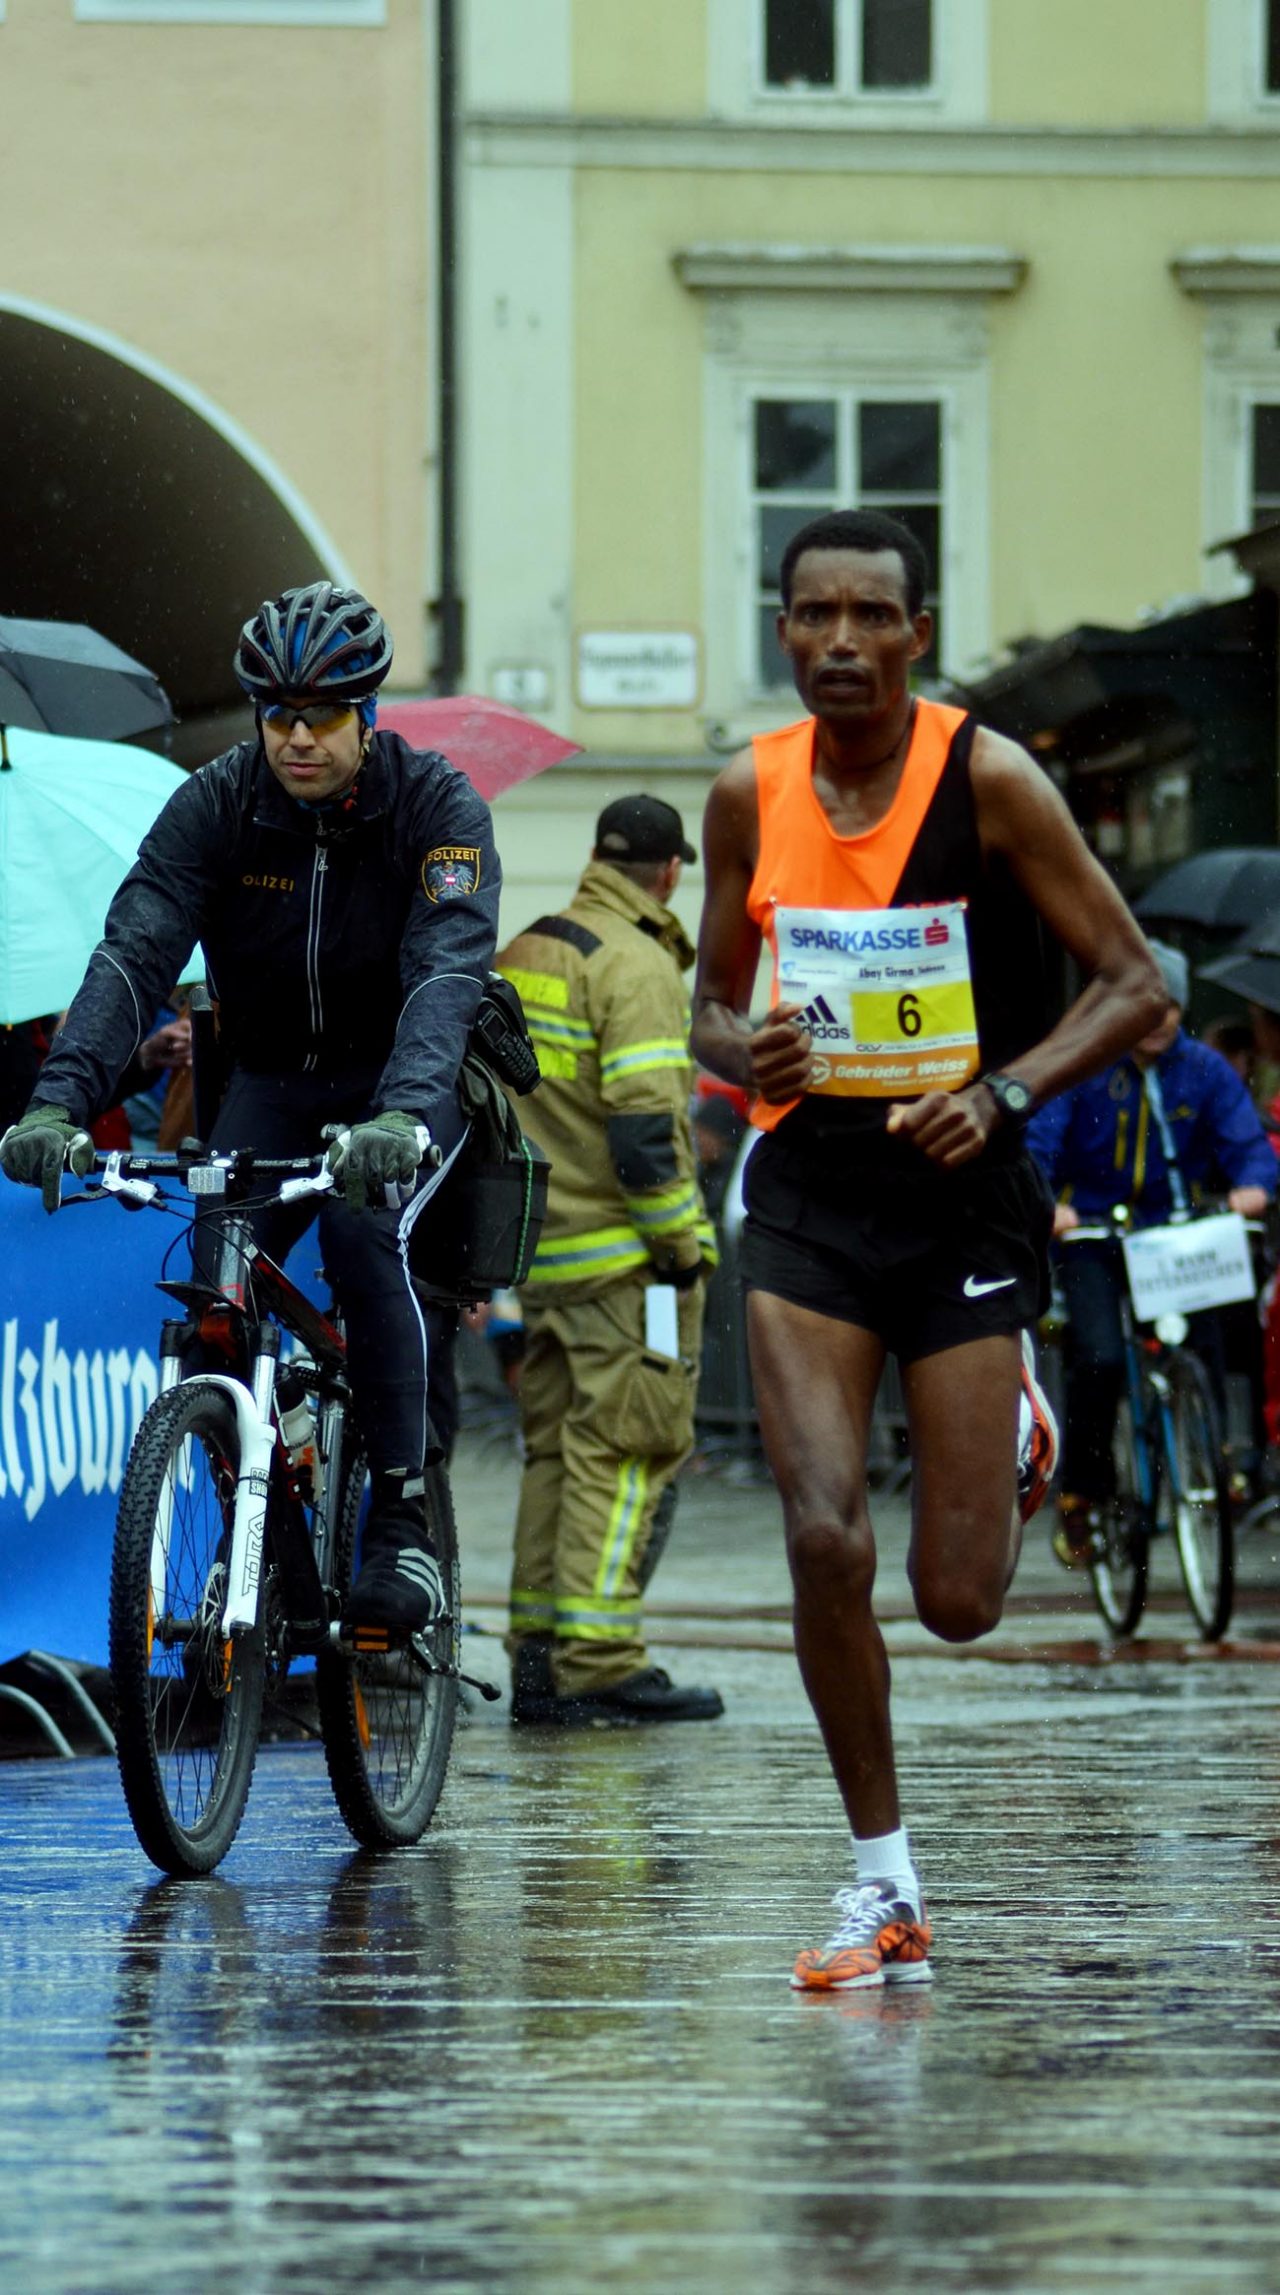 Top runner Temesgen Bekele shortly before crossing the finish line in Salzburg – accompanied by a bike-riding policeman. Even the cops travel in eco-friendly style! Photo: Buschmann